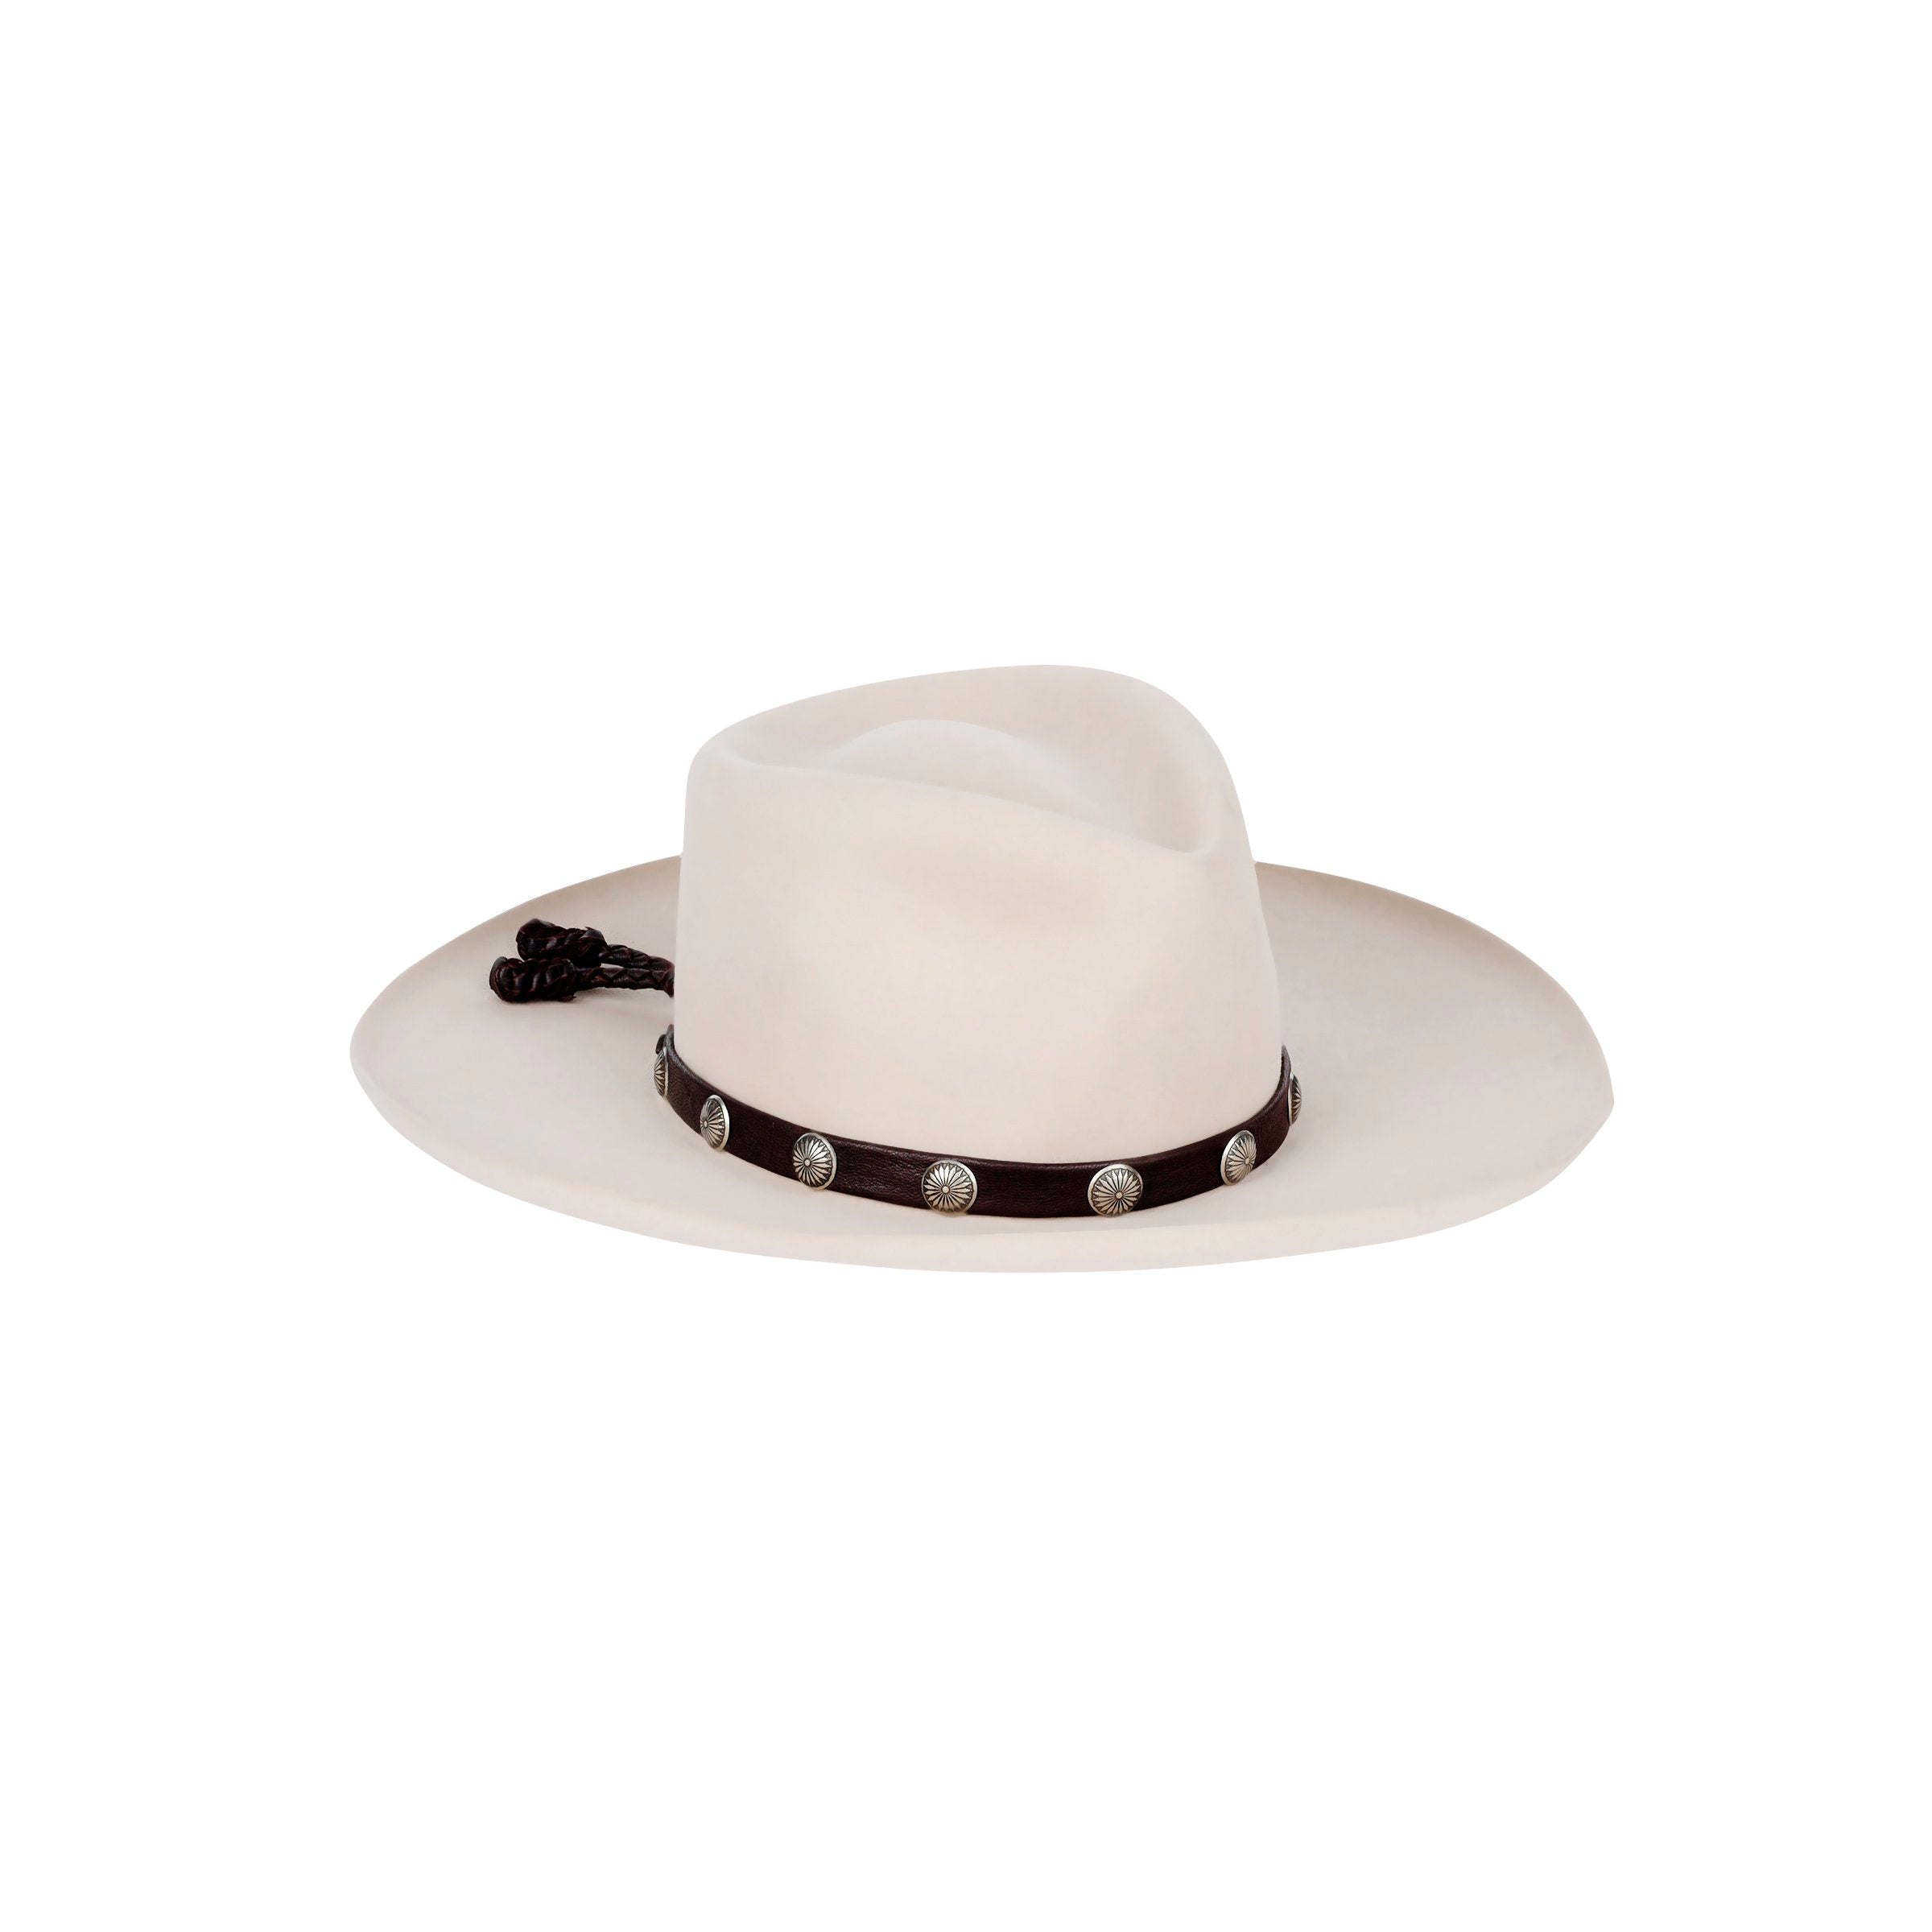 Lampman Leather Hat Bands with Silver Conchos - Dk Brown